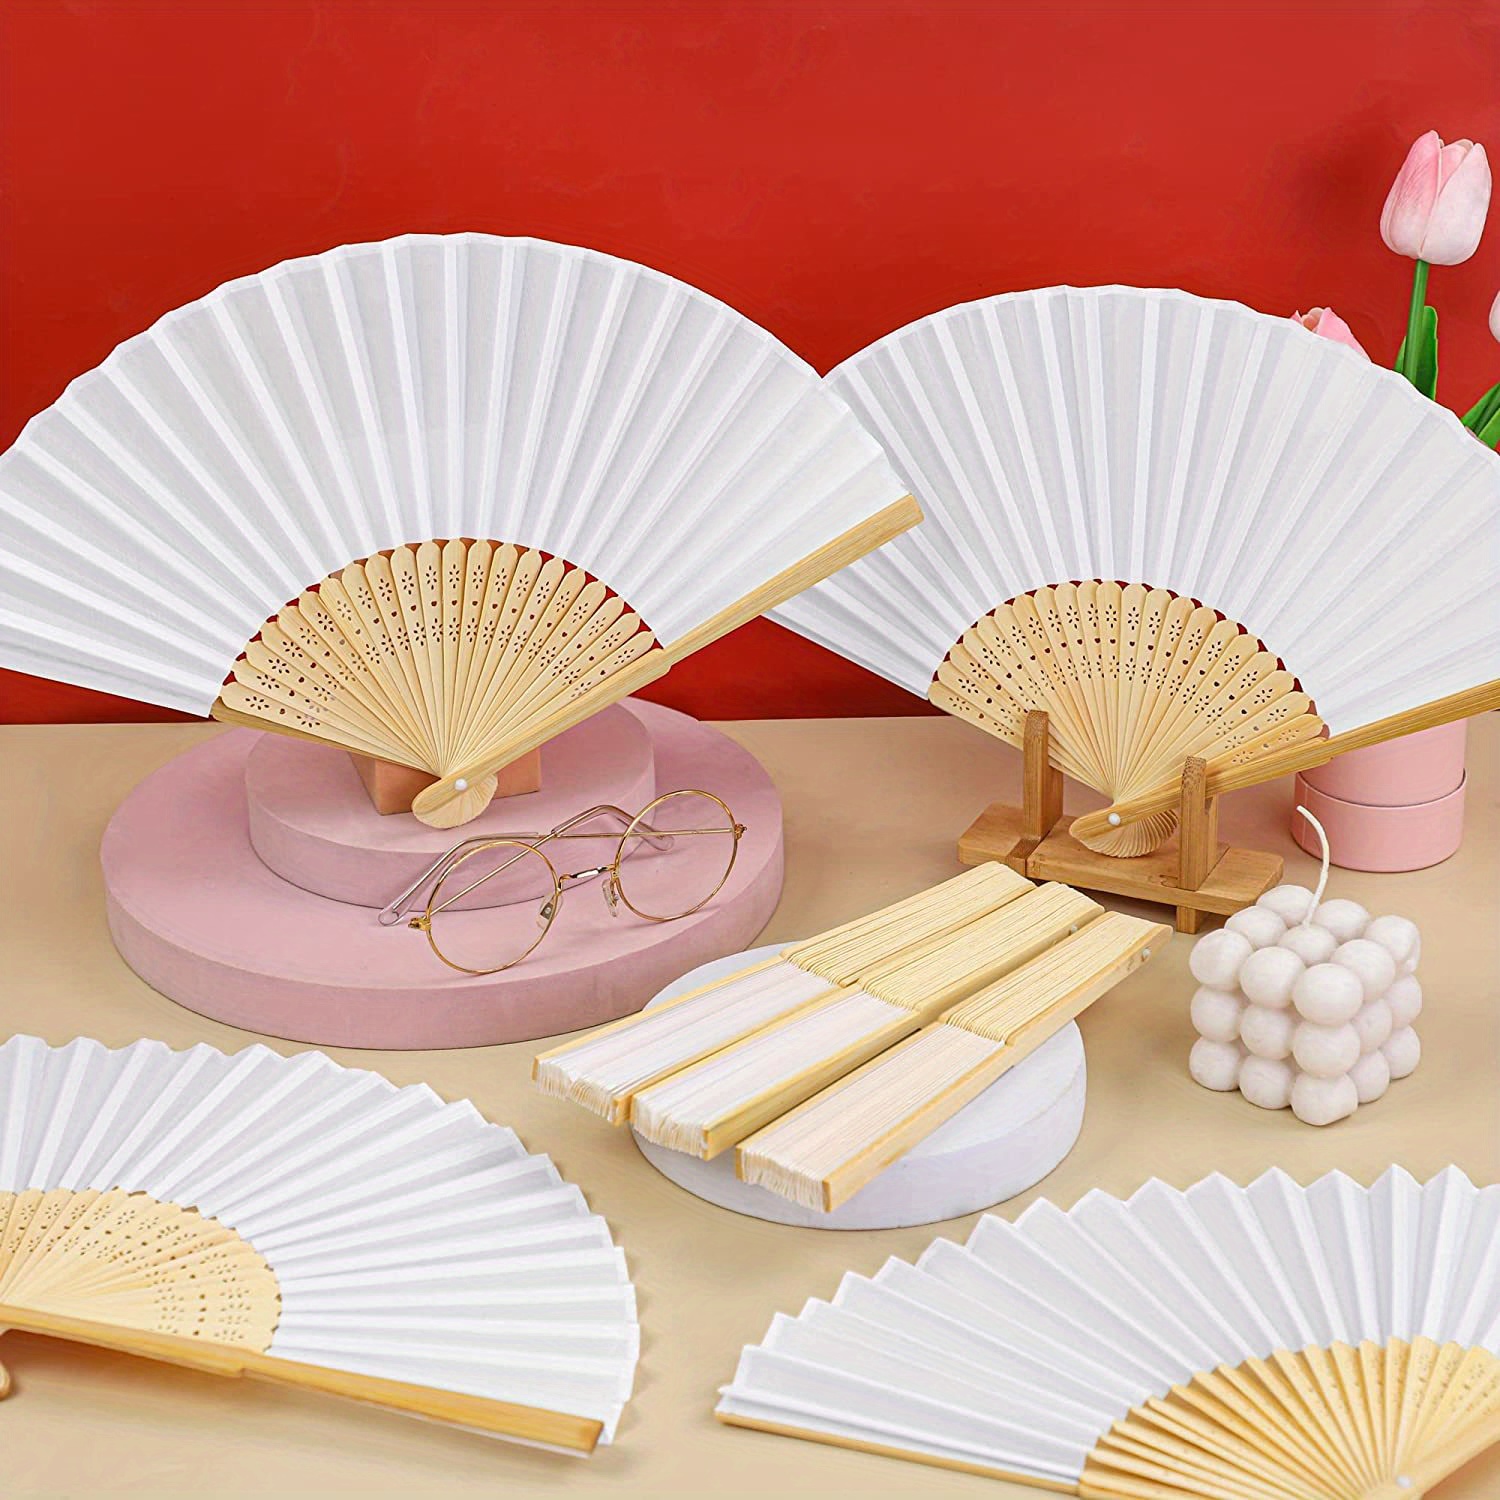 ZQNYCY 20/10pcs White Folding Fan Chinese Bamboo Paper Fans Wedding Gifts for Guest Birthday Party